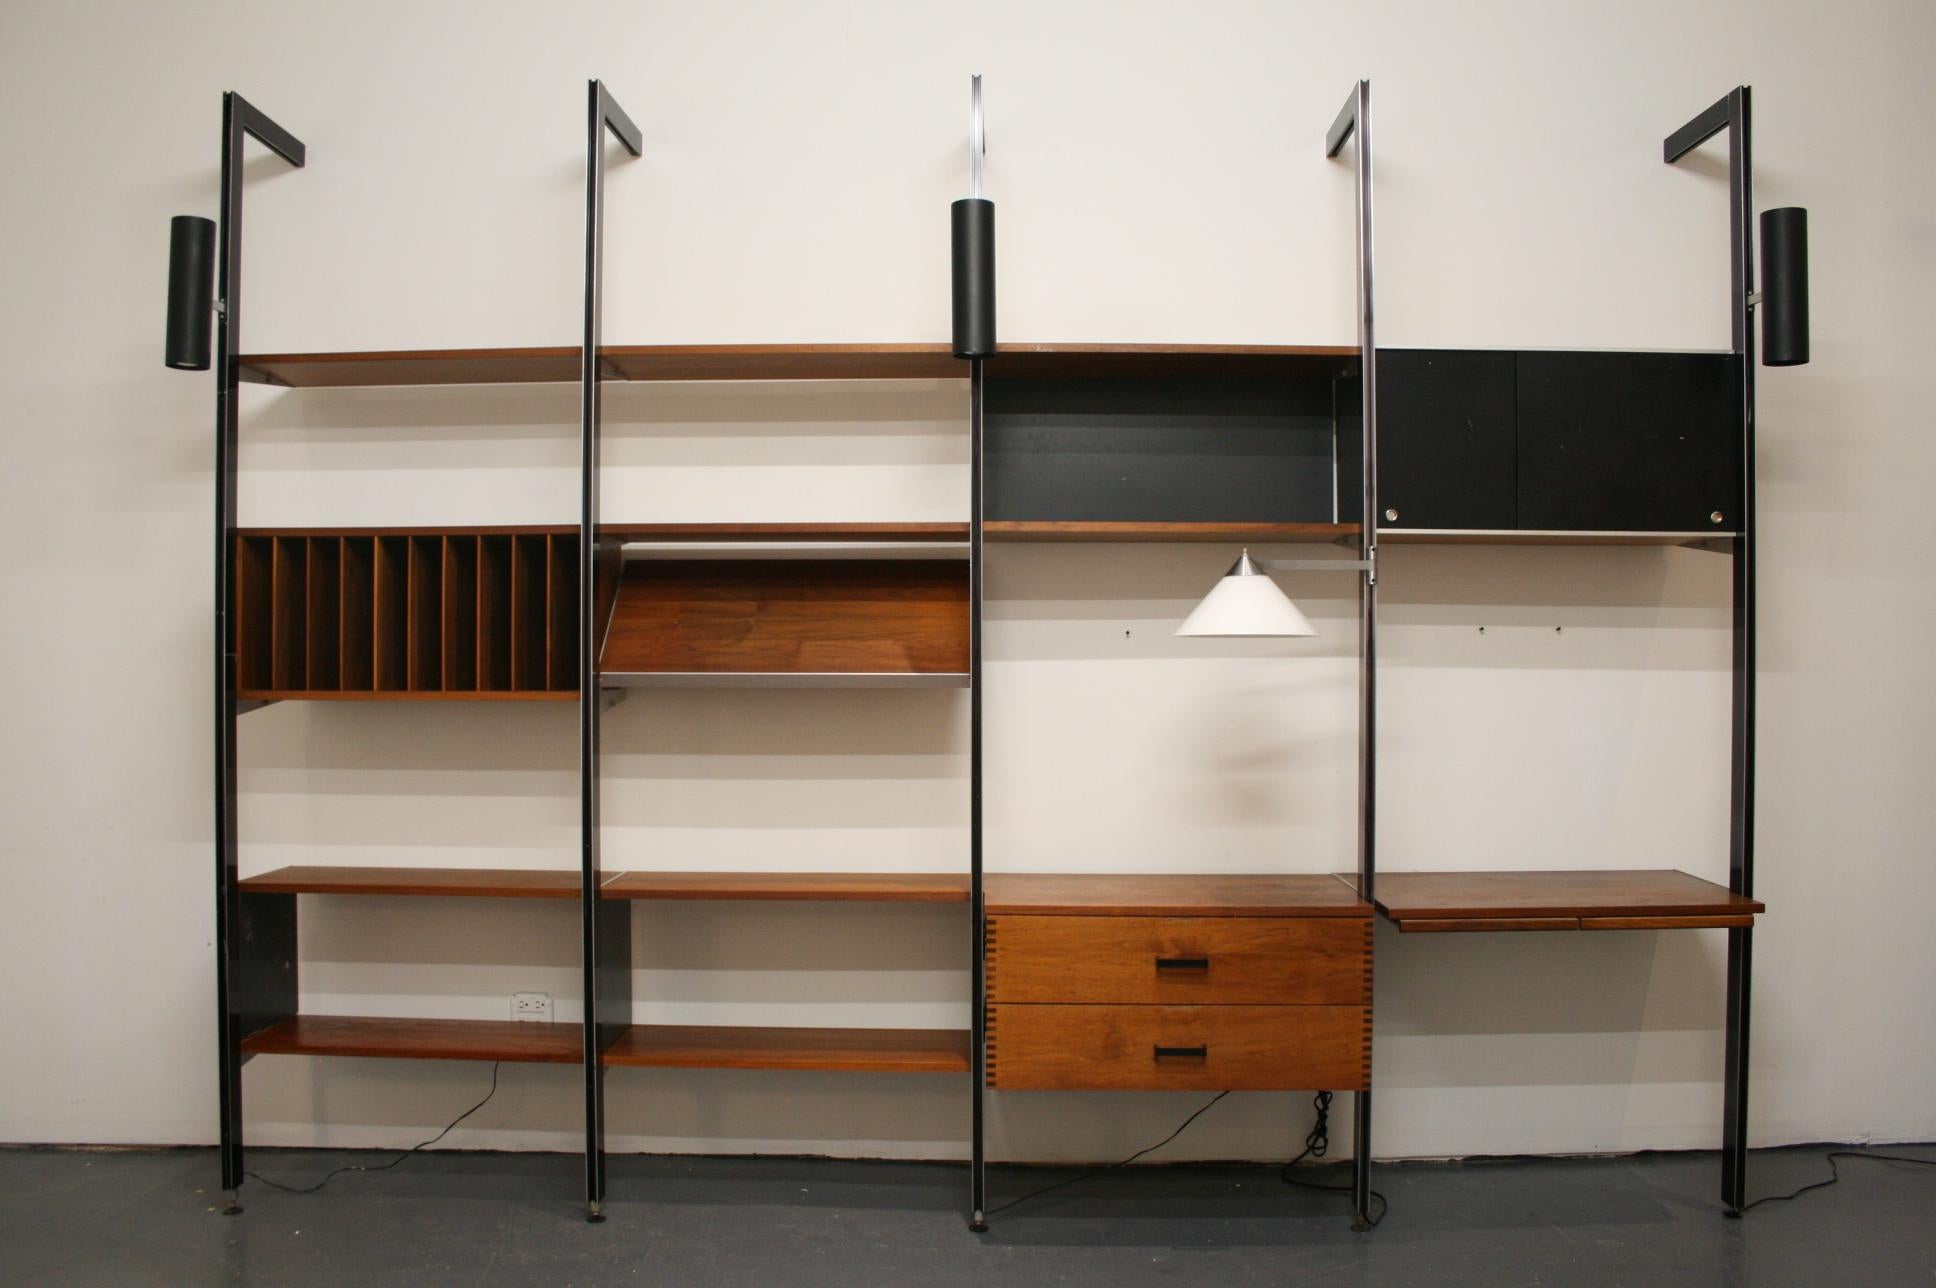 This original design 4 bay wall unit includes:

-5 black anodized aluminum poles with tieback bars for wall installation
-3 black cylinder up/down lights
-1 glass cone desk lamp on swivel arm
-1 -32